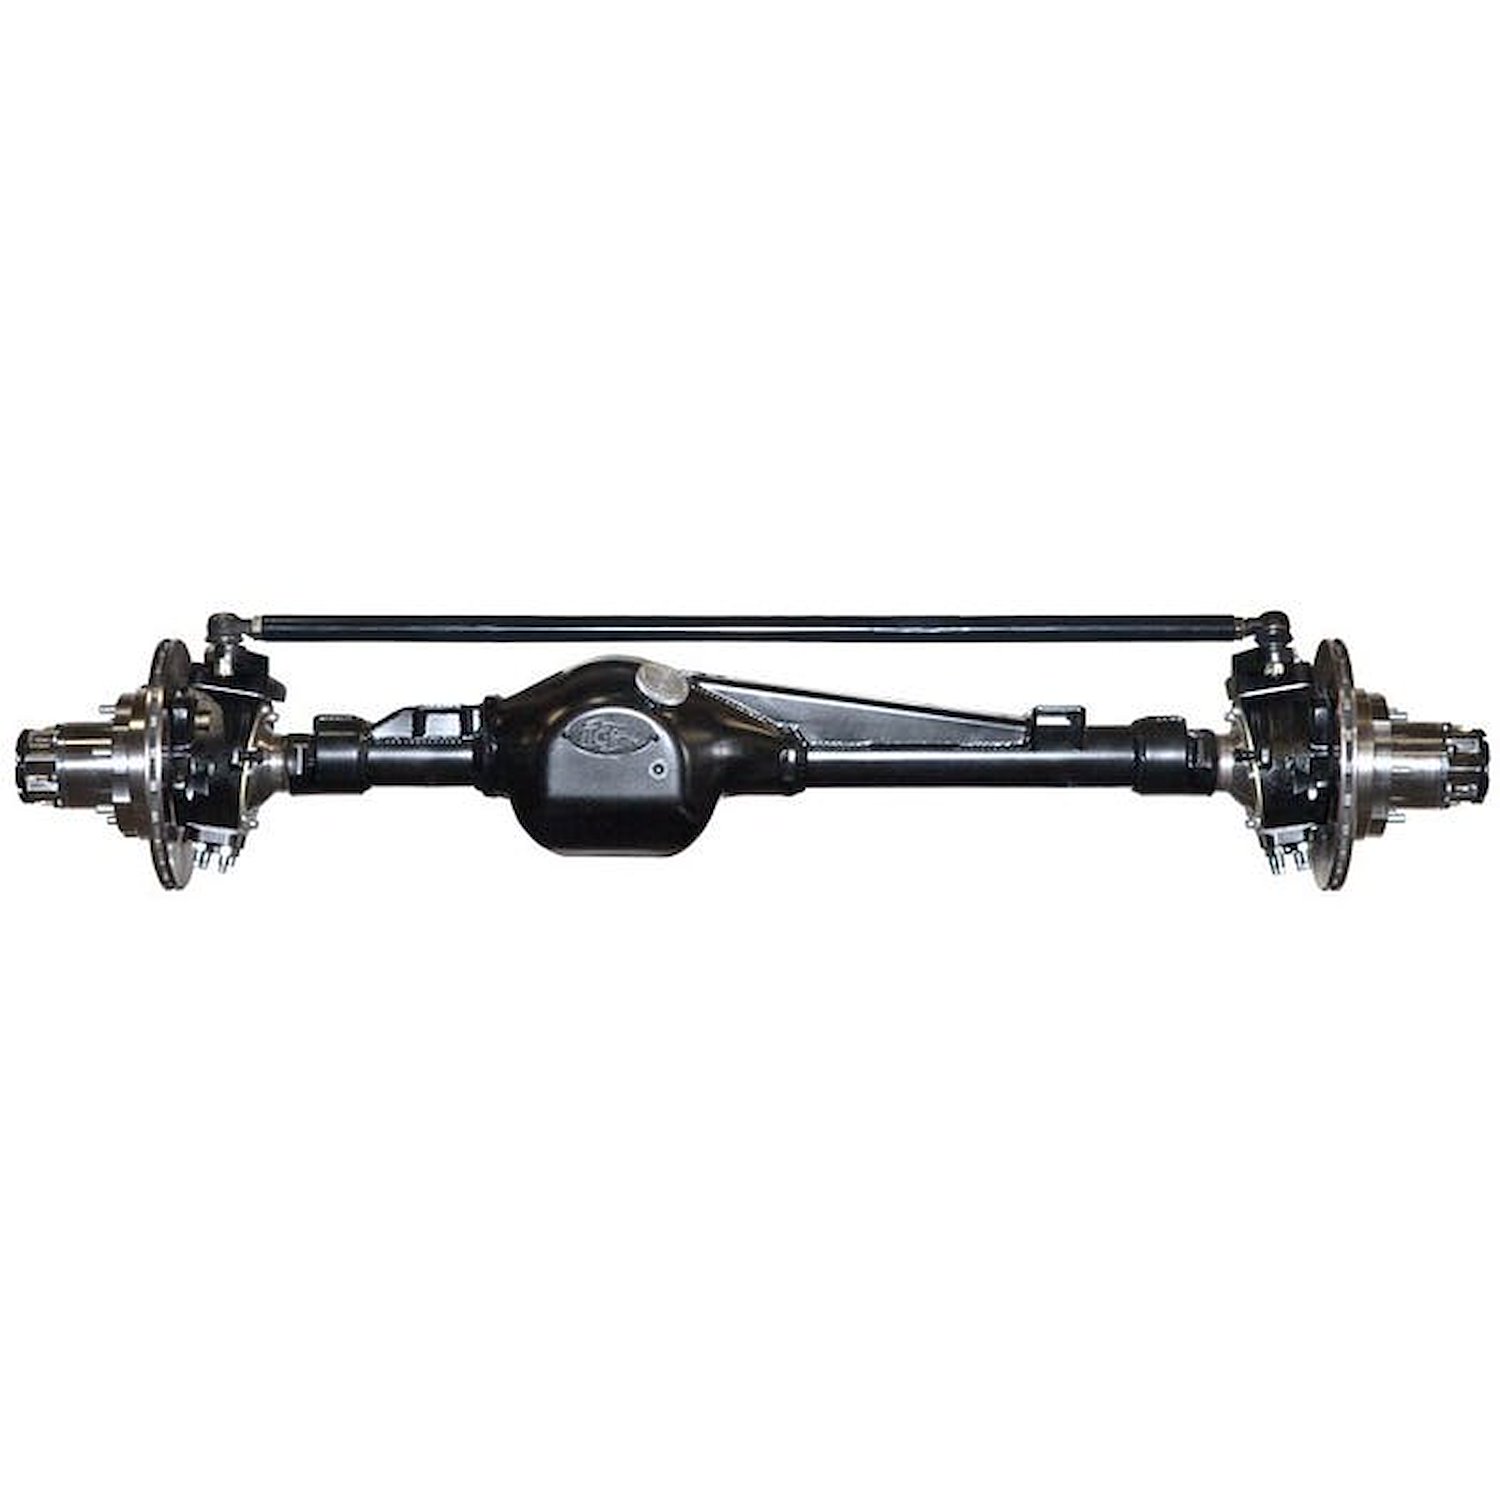 301603-1-KIT Rock Assault Fully-Built Front Axles, +3 Width, LHD, V6, 5.29, Grizzly, Locking Hubs, Toyota